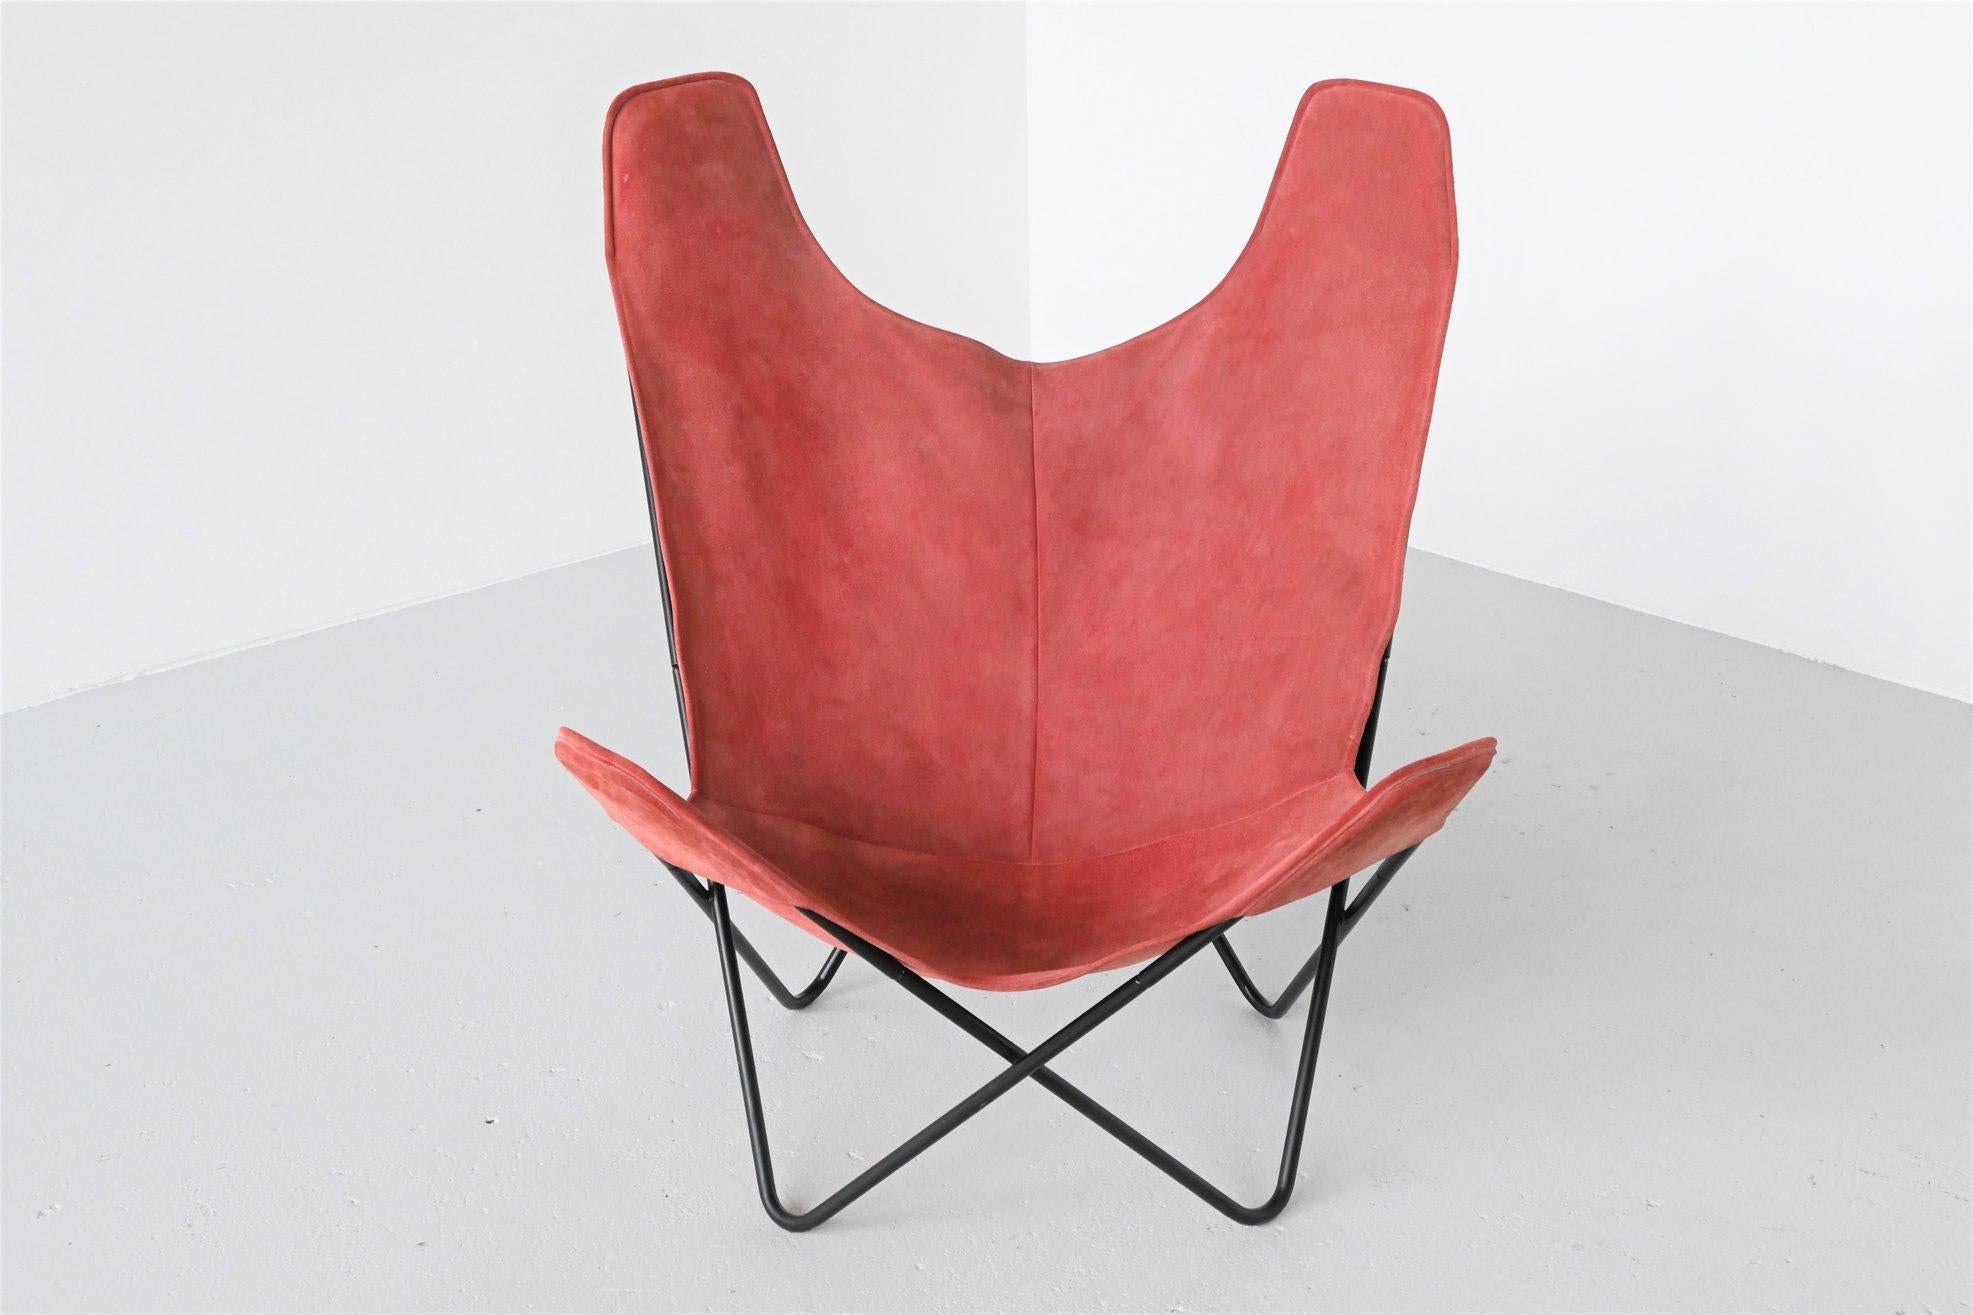 Iconic lounge chair designed by Jorge Hardoy-Ferrari for Knoll International, USA, 1970. This lounge chair is probably one of the most copied chairs ever. Since the chair was designed in the 1950s without copyright, every company could make it. This